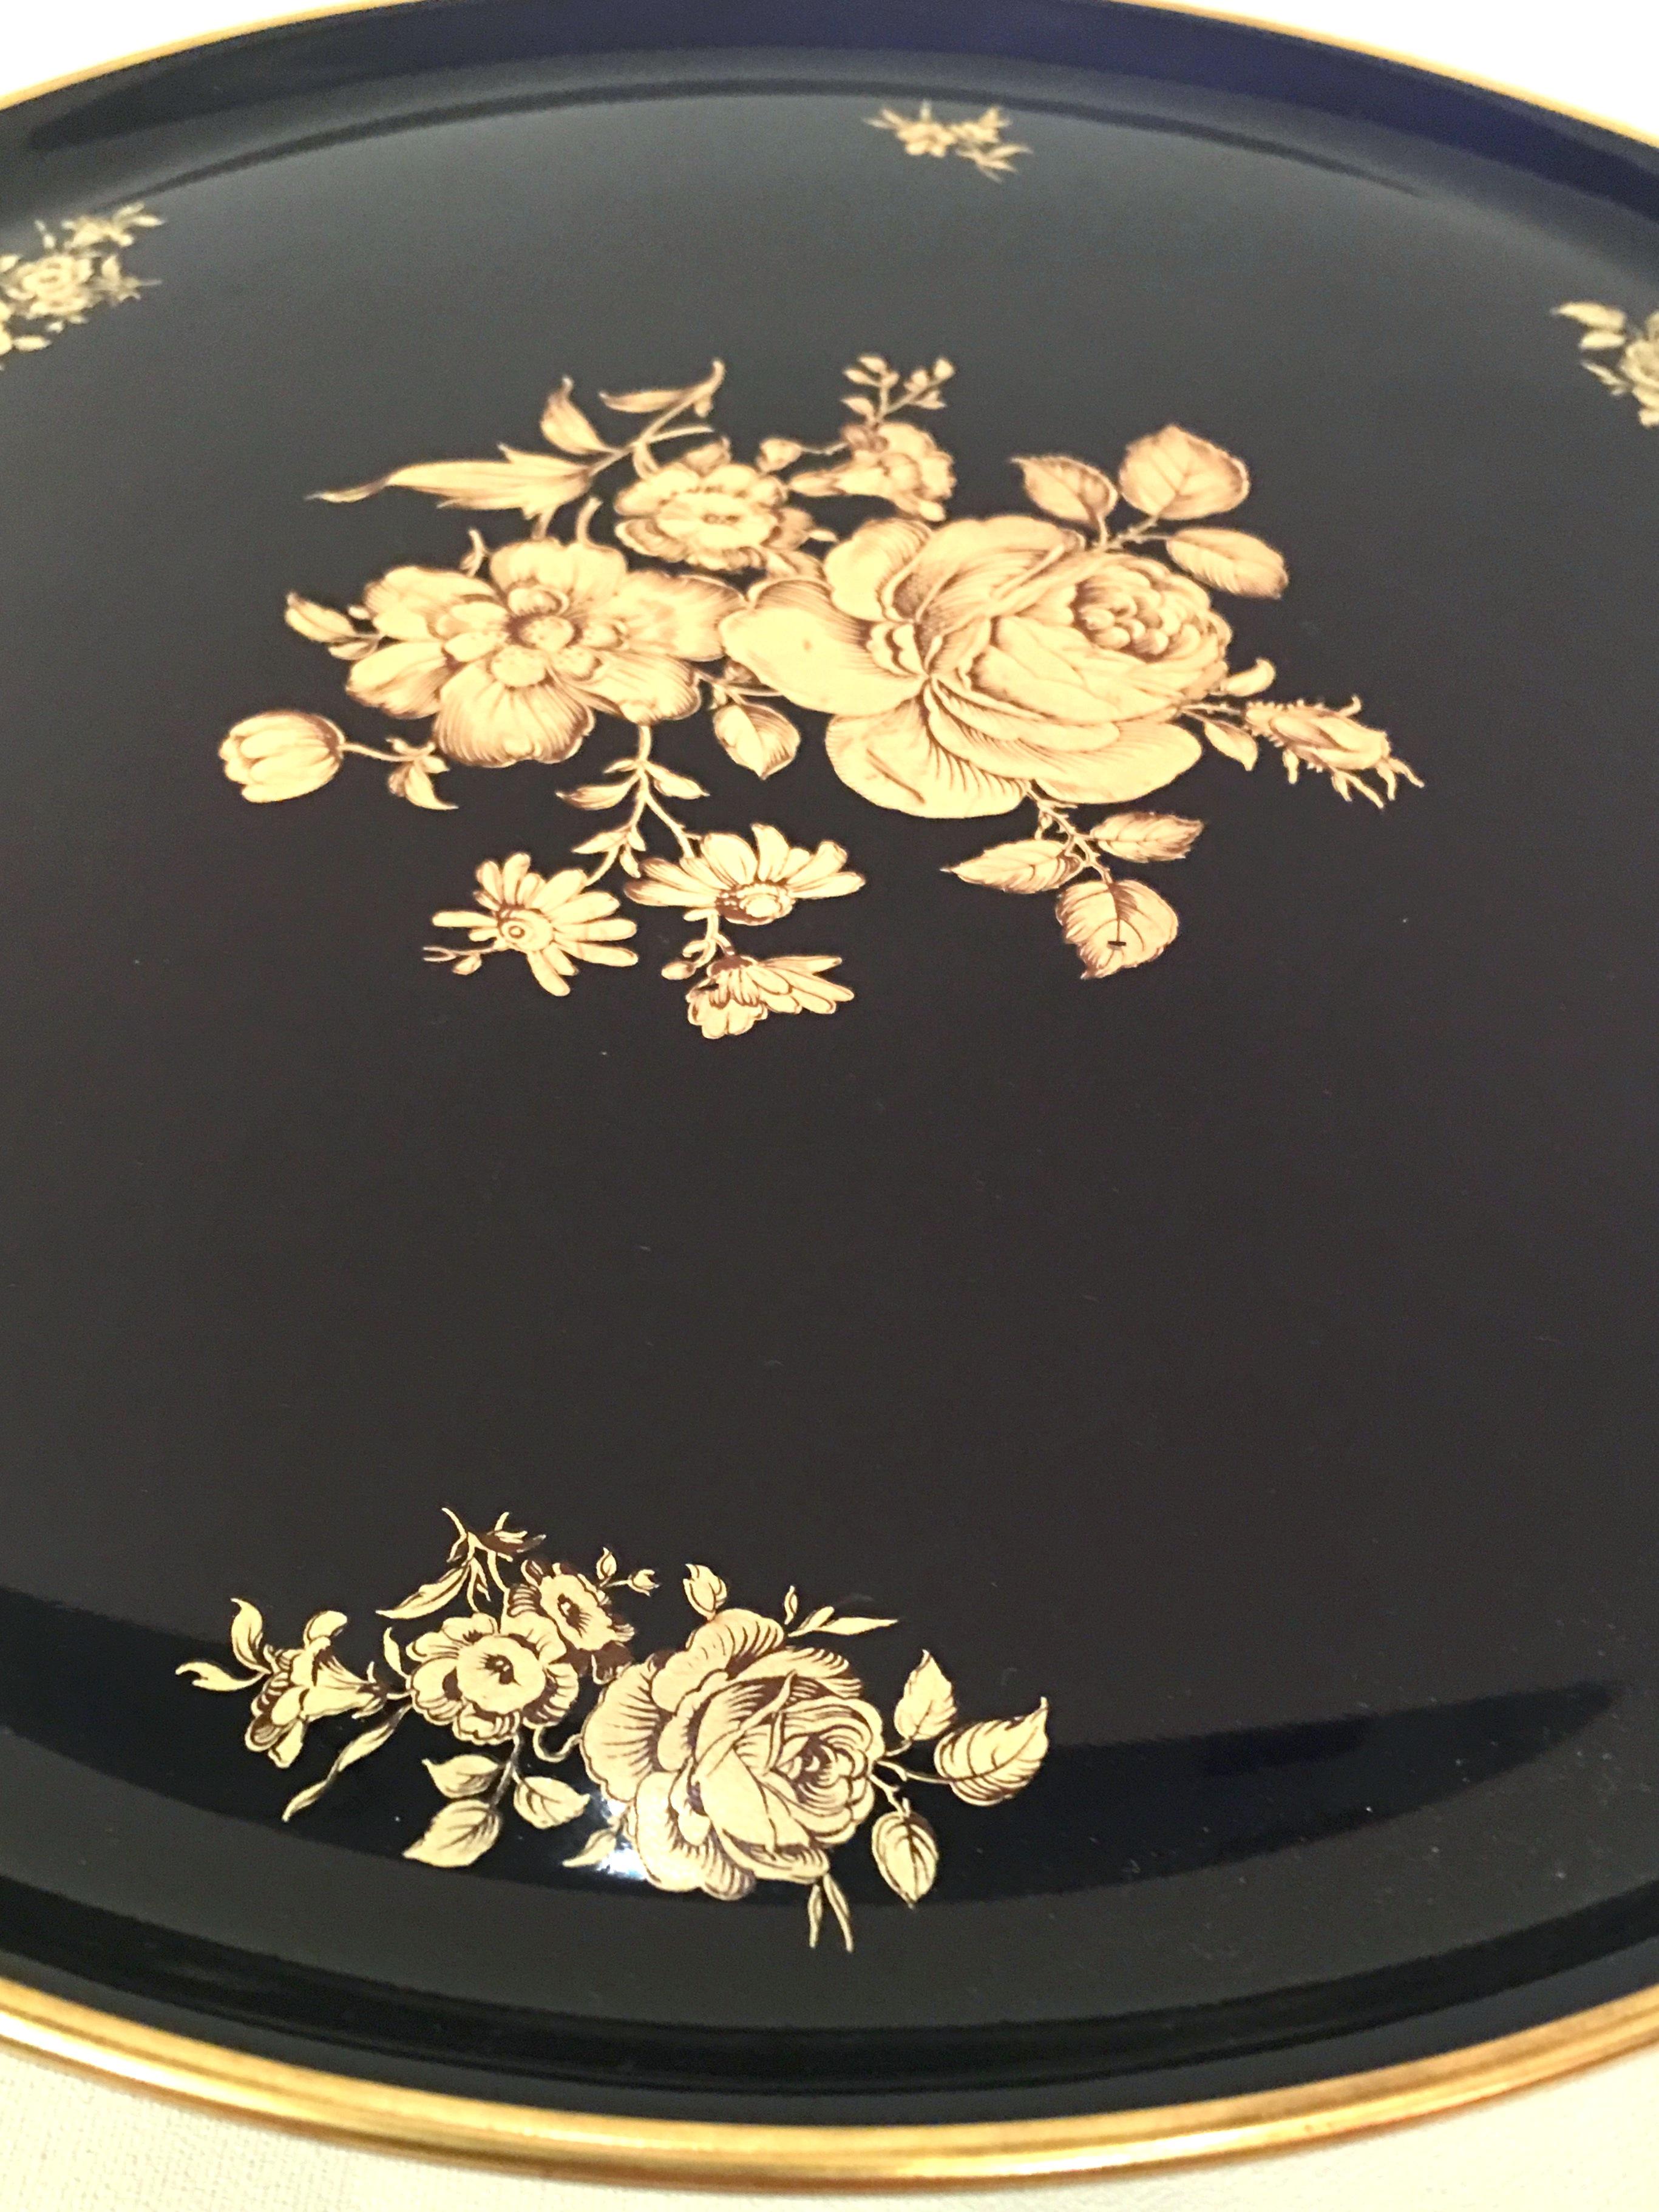 20th Century German Porcelain & 22-Karat Gold Footed Cake Platter By, Bareuther For Sale 2